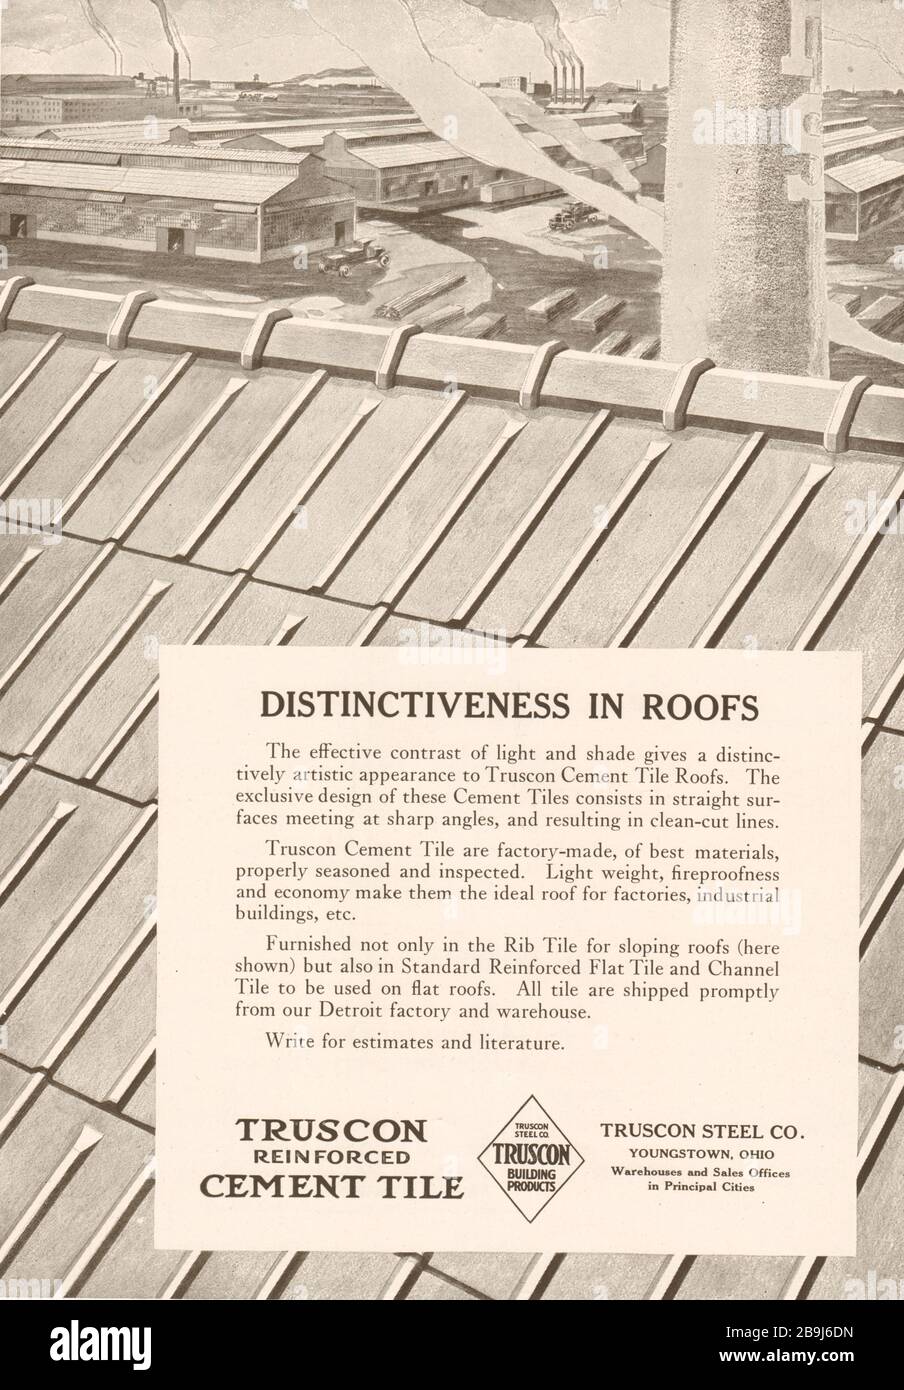 Distinctiveness in roofs. Truscon reinforced cement tile. Truscon steel Co., Youngstown, Ohio (1919) Stock Photo